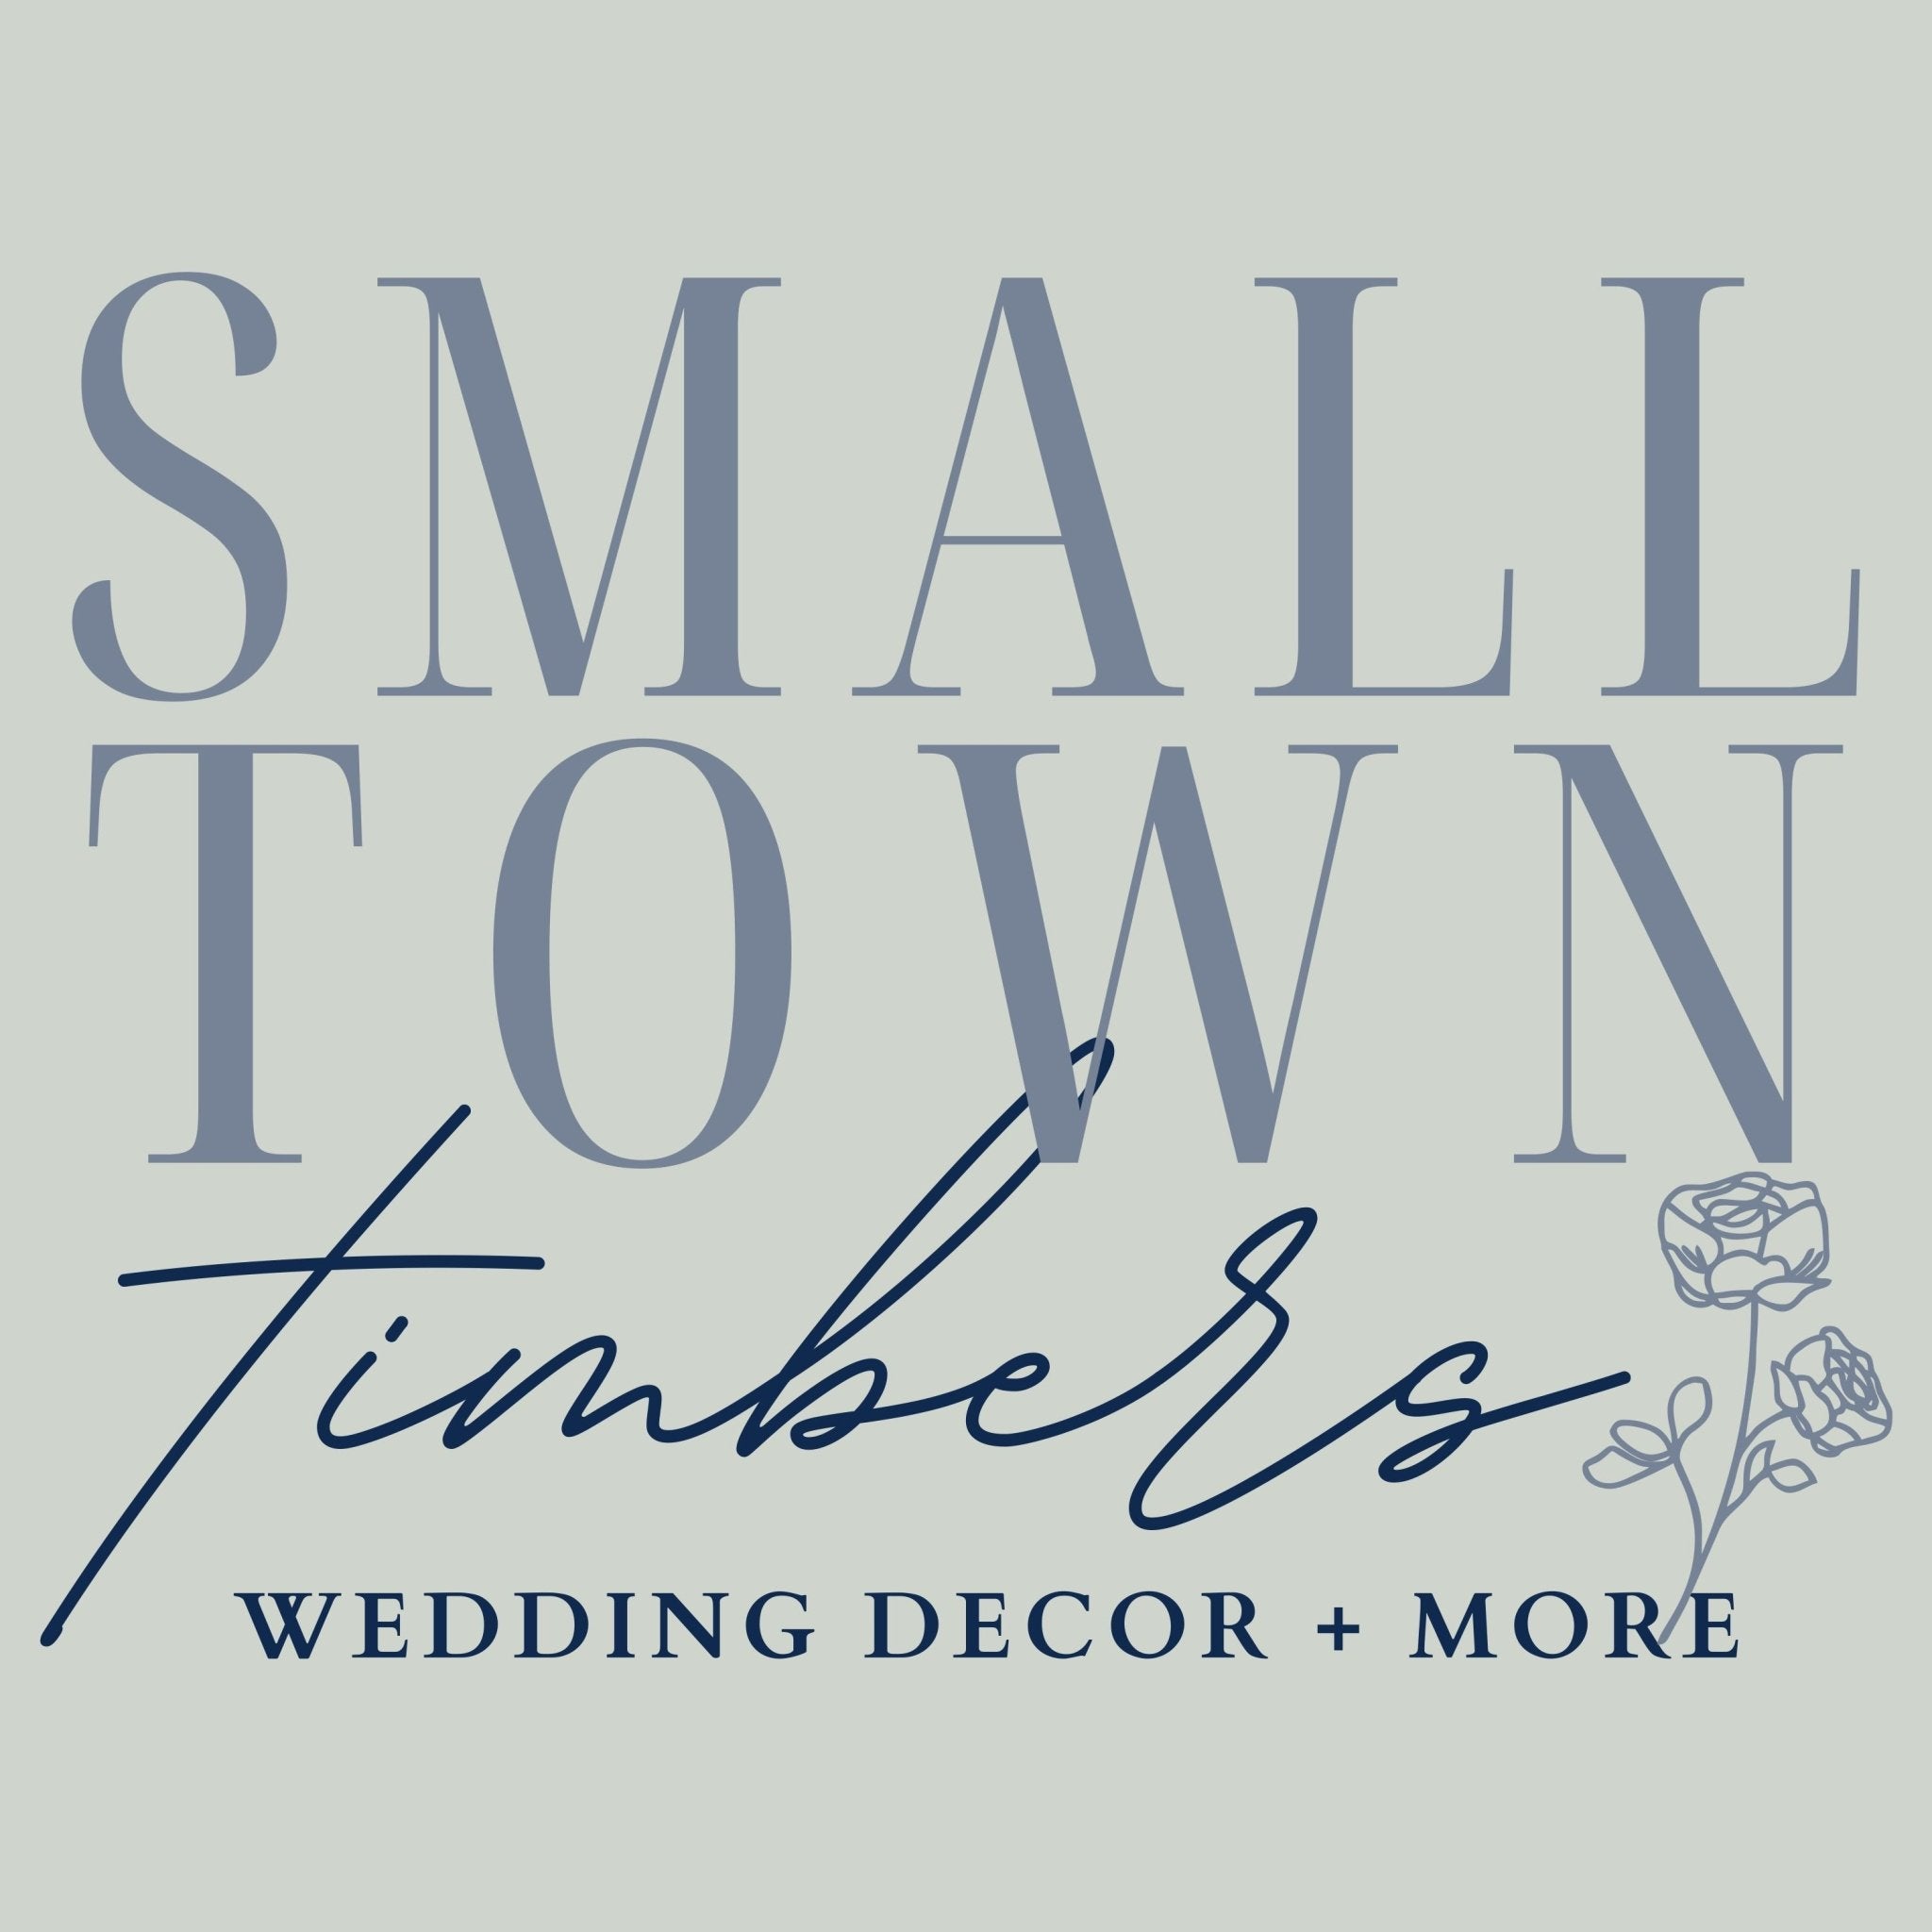 RANDALL + JESSICA WEDDING WELCOME SIGN - Small Town Timbers